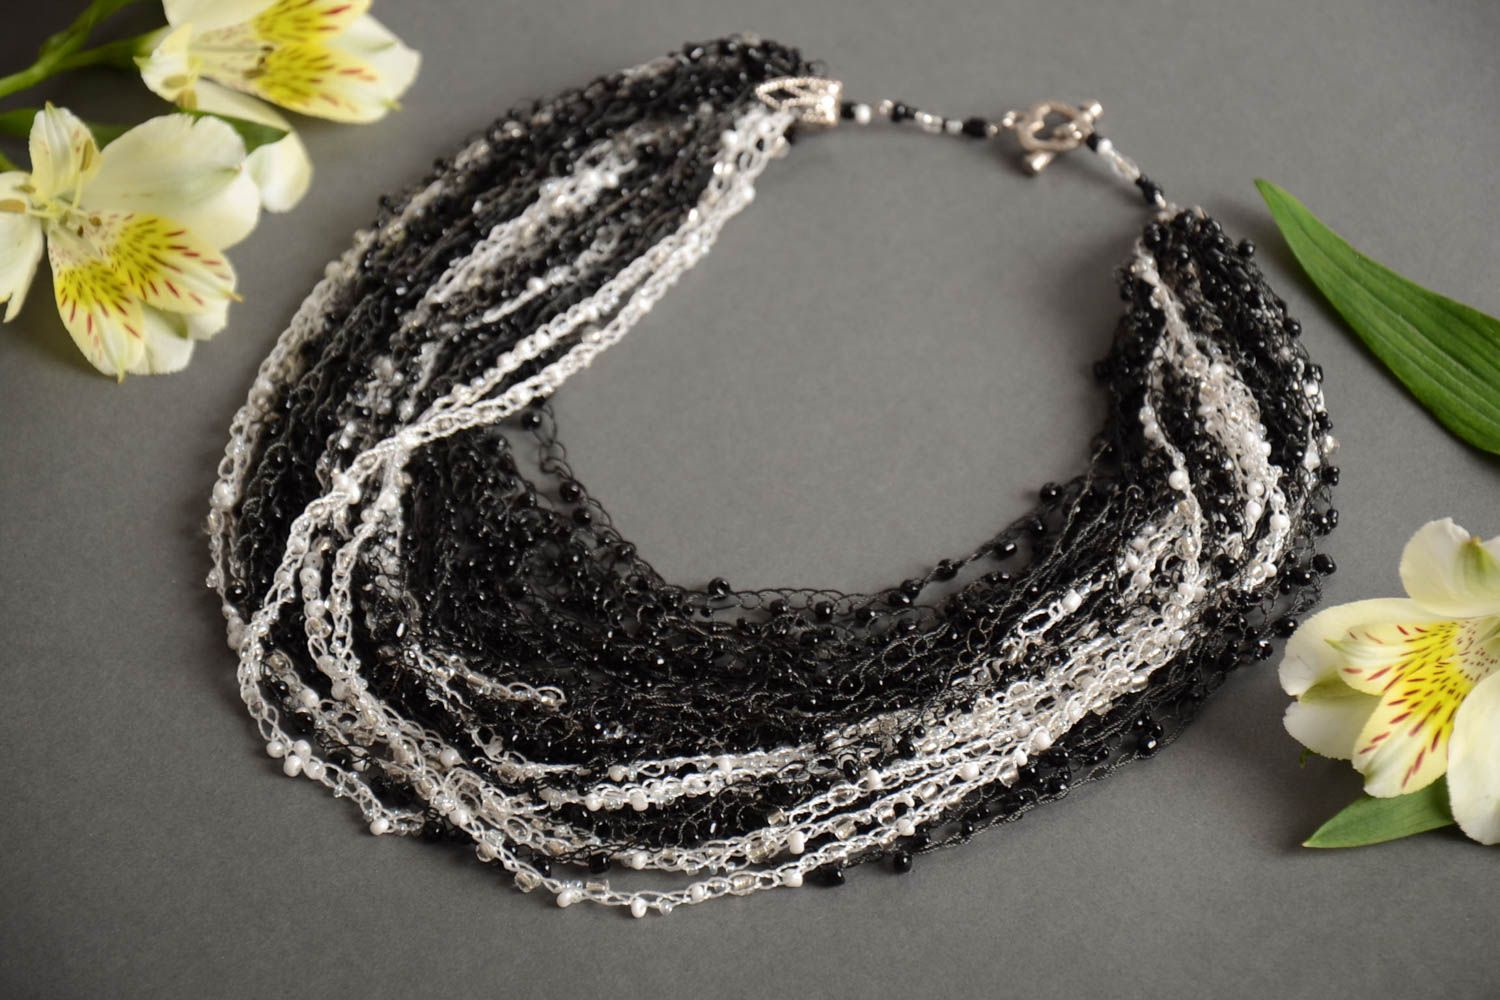 Handmade volume necklace crocheted of Czech beads in black and white colors photo 1